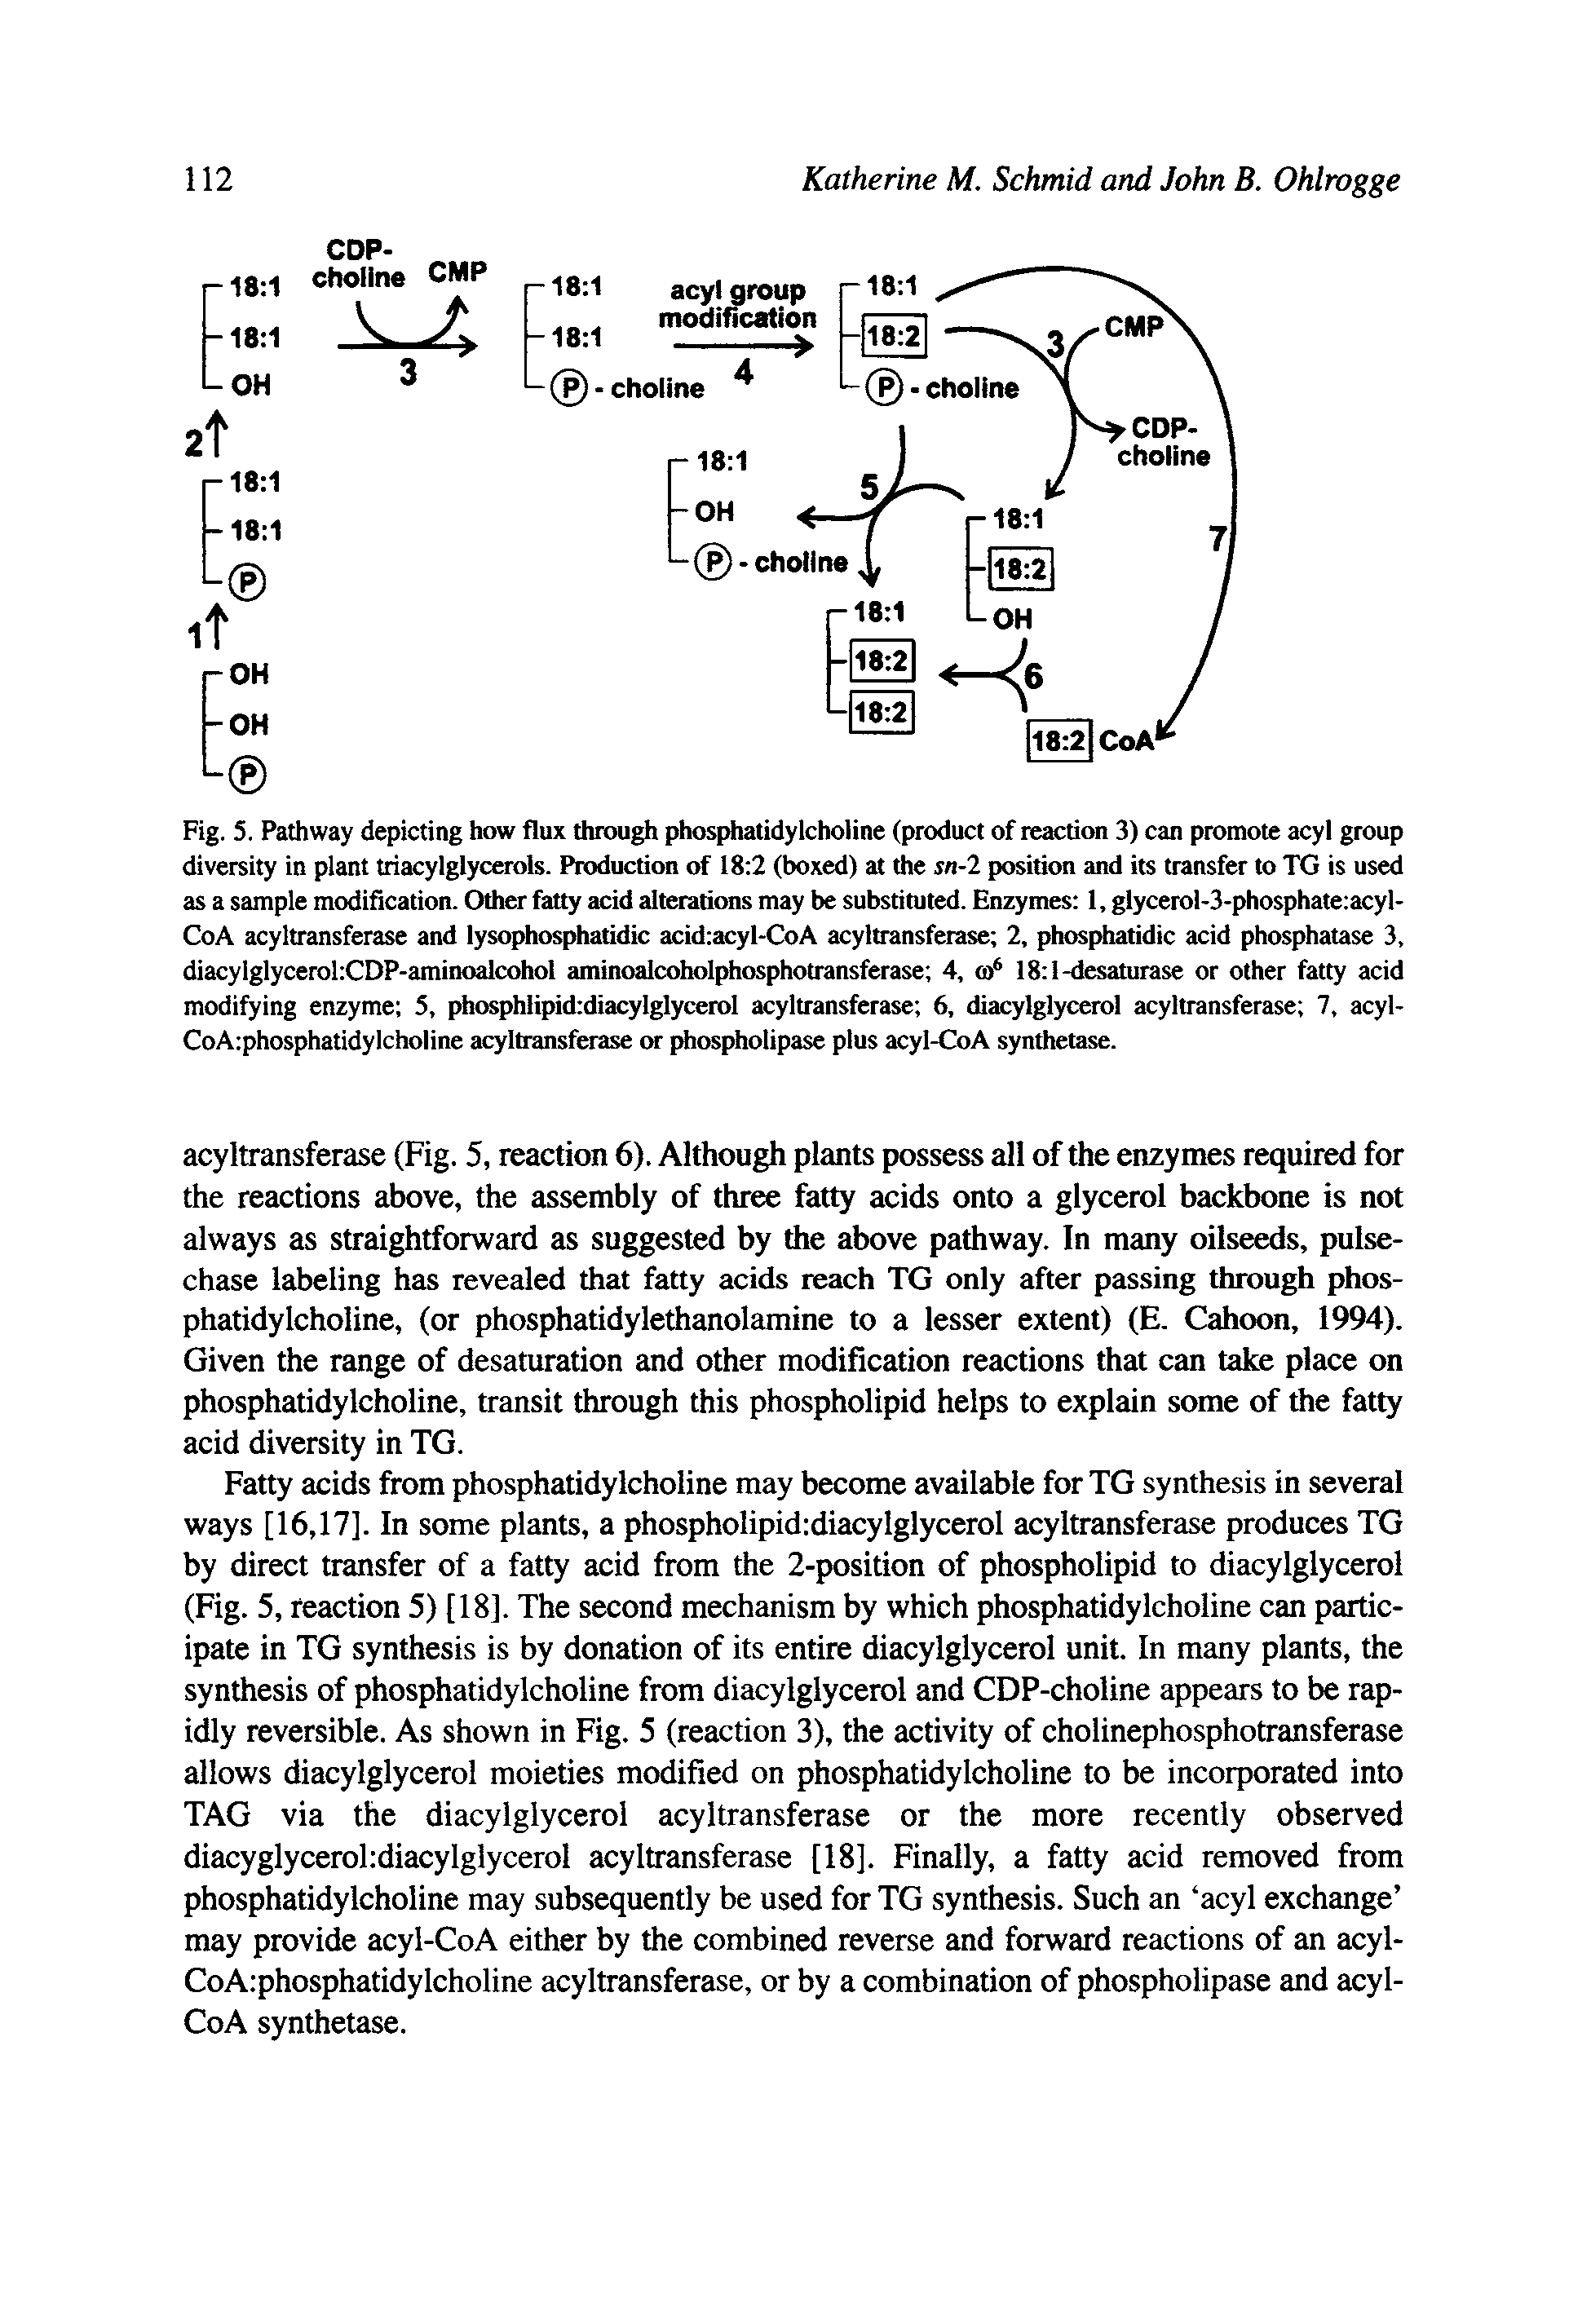 Fig. 5. Pathway depicting how flux through phosphatidylcholine (product of reaction 3) can promote acyl group diversity in plant triacylglycerols. Production of 18 2 (boxed) at the sn-2 position and its transfer to TG is used as a sample modification. Other fatty acid alterations may be substituted. Enzymes 1, glycerol-3-phosphate acyl-CoA acyltransferase and lysophosphatidic acid acyl-CoA acyltransferase 2, phosphatidic acid phosphatase 3, diacylglyceroliCDP-aminoalcohol aminoalcoholphosphotransferase 4, 18 l-desaturase or other fatty acid modifying enzyme 5, phosphlipid diacylglycerol acyltransferase 6, diacylglycerol acyltransferase 7, acyl-CoA phosphatidylcholine acyltransferase or phospholipase plus acyl-CoA synthetase.